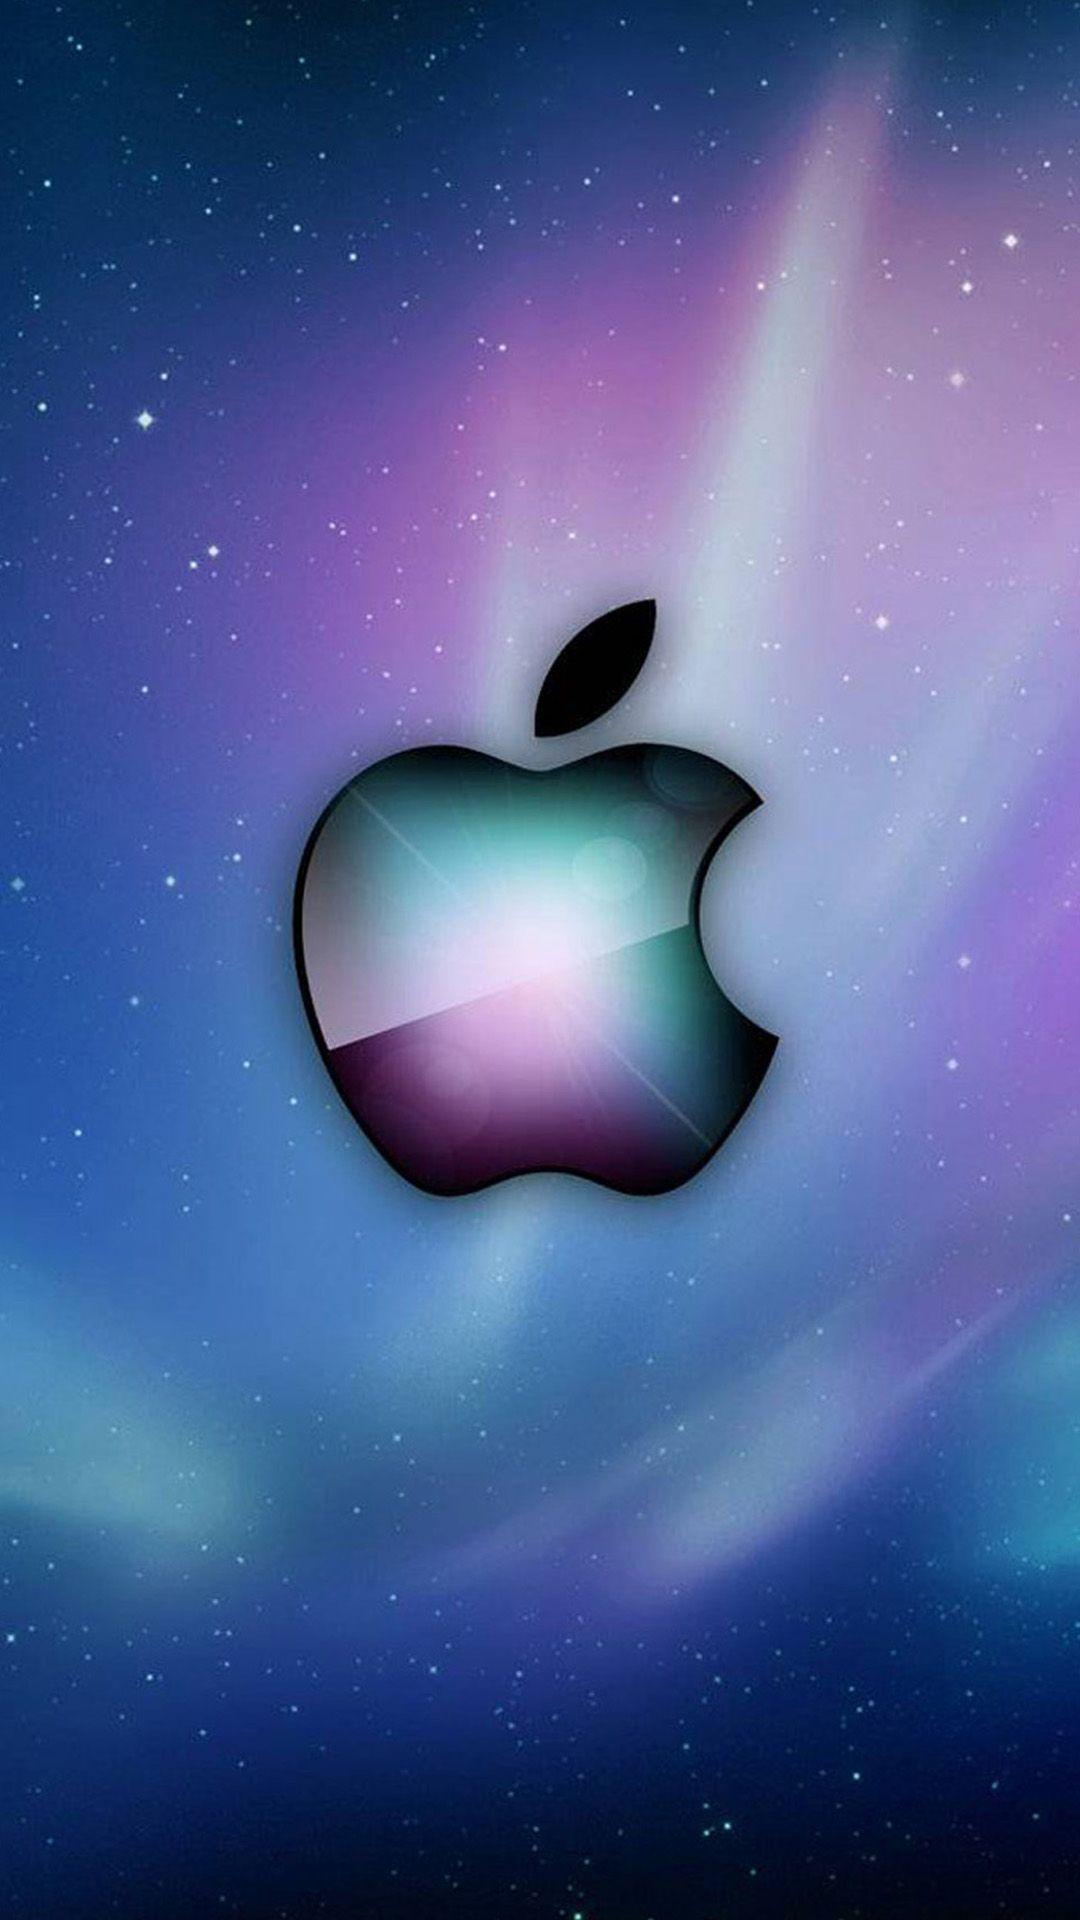 Apple Logo iPhone 4S Wallpapers - Top Free Apple Logo iPhone 4S ...